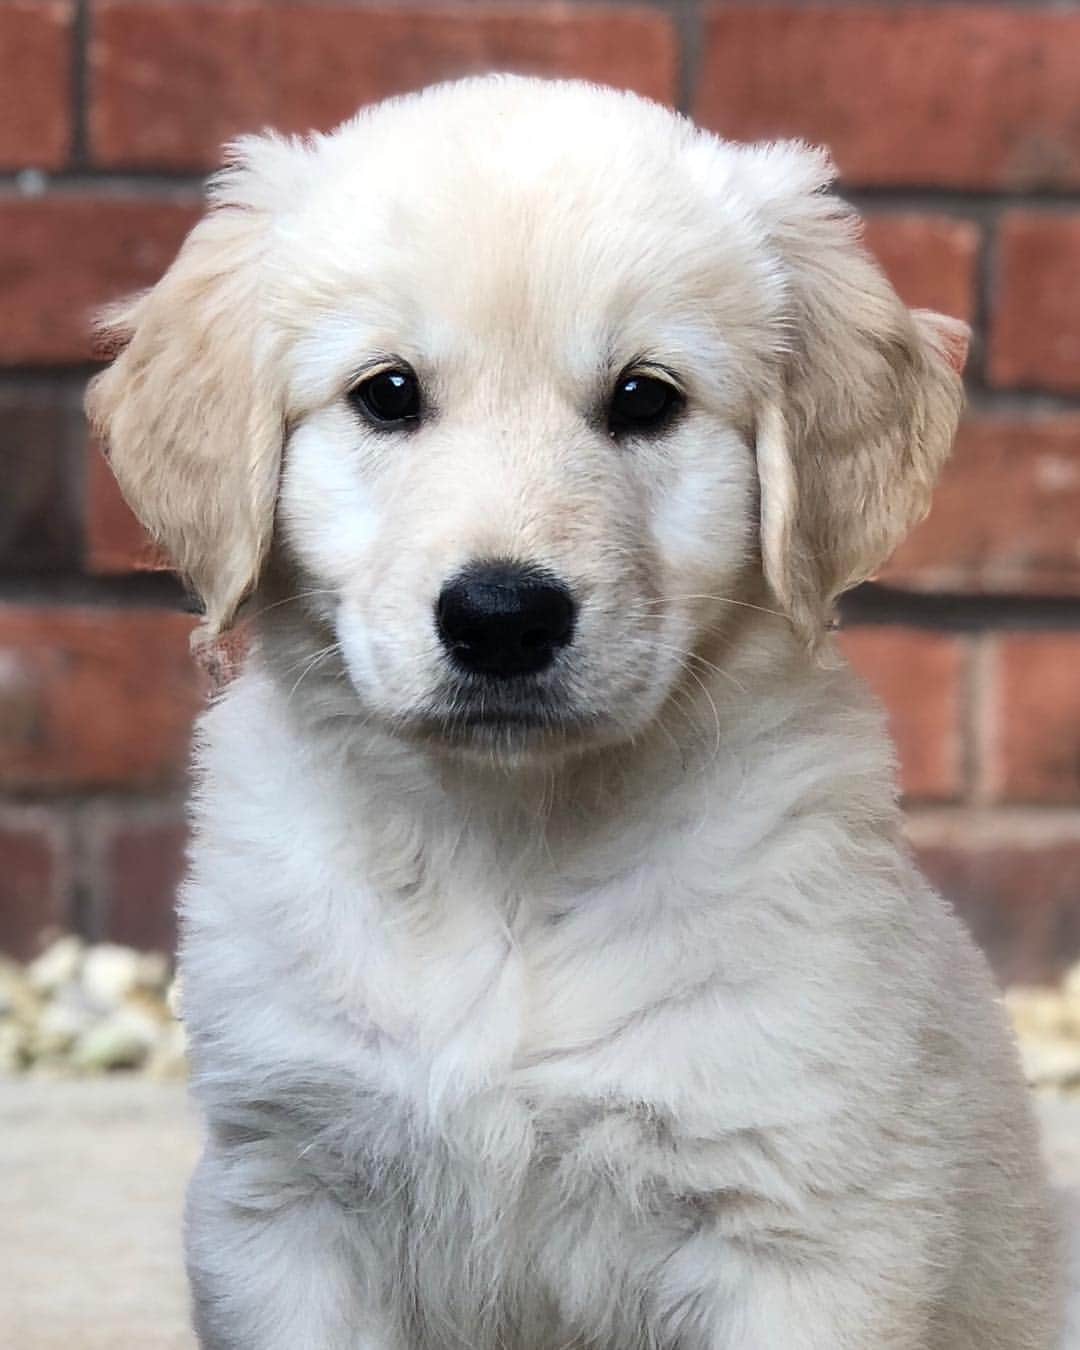 Bombastic Bengalsのインスタグラム：「“Pardon me, are you Aaron Burr, sir?” Meet our new baby, Burr ❤️ Yes, he is named after Aaron Burr the third Vice President of the United States and the best character in the Hamilton Musical 🎼 . . . . #golden #goldens #goldenretriever #goldenretrieverpuppy #goldenglobes #ilovegolden_retrievers #petstagram #goldenretriever #goldenretrievers #dogsofinstagram #dogstagram #retrieversofinstagram #dailybarker #goldenretrieversofinstagram #dogsofinstagram #puppiesofinstagram #hamiltonmusical #linmanuelmiranda」